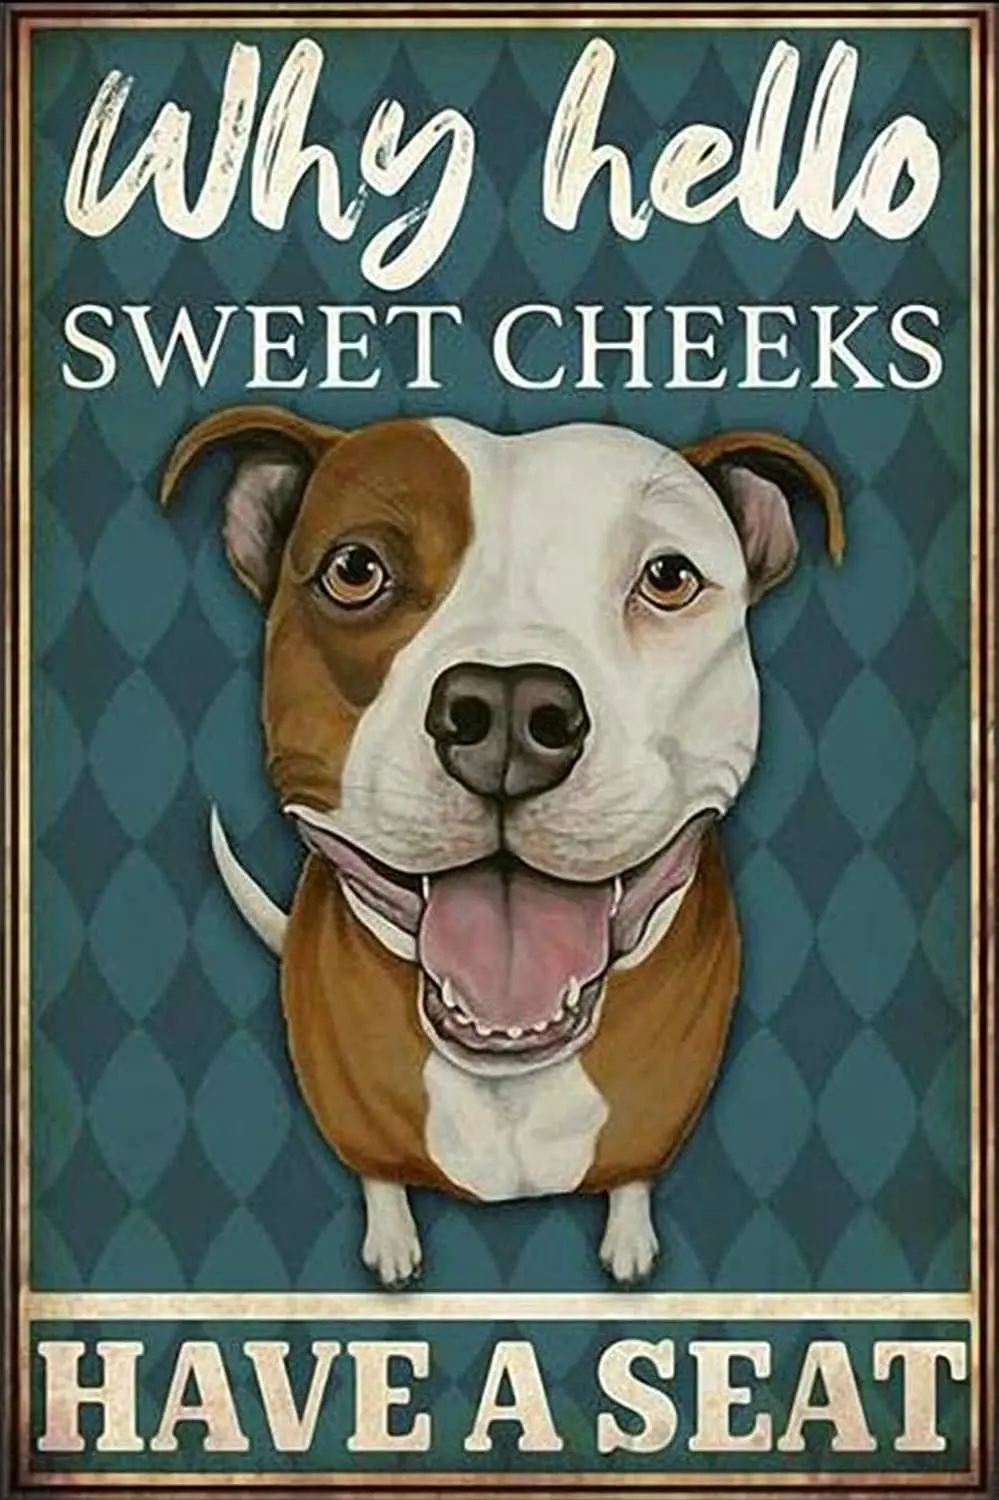 

Vintage Wall Poster Metal Plaque,Pitbull Why Hello Sweet Cheeks Have A Seat Poster, Dog Lovers Gift,Dog Metal Wall